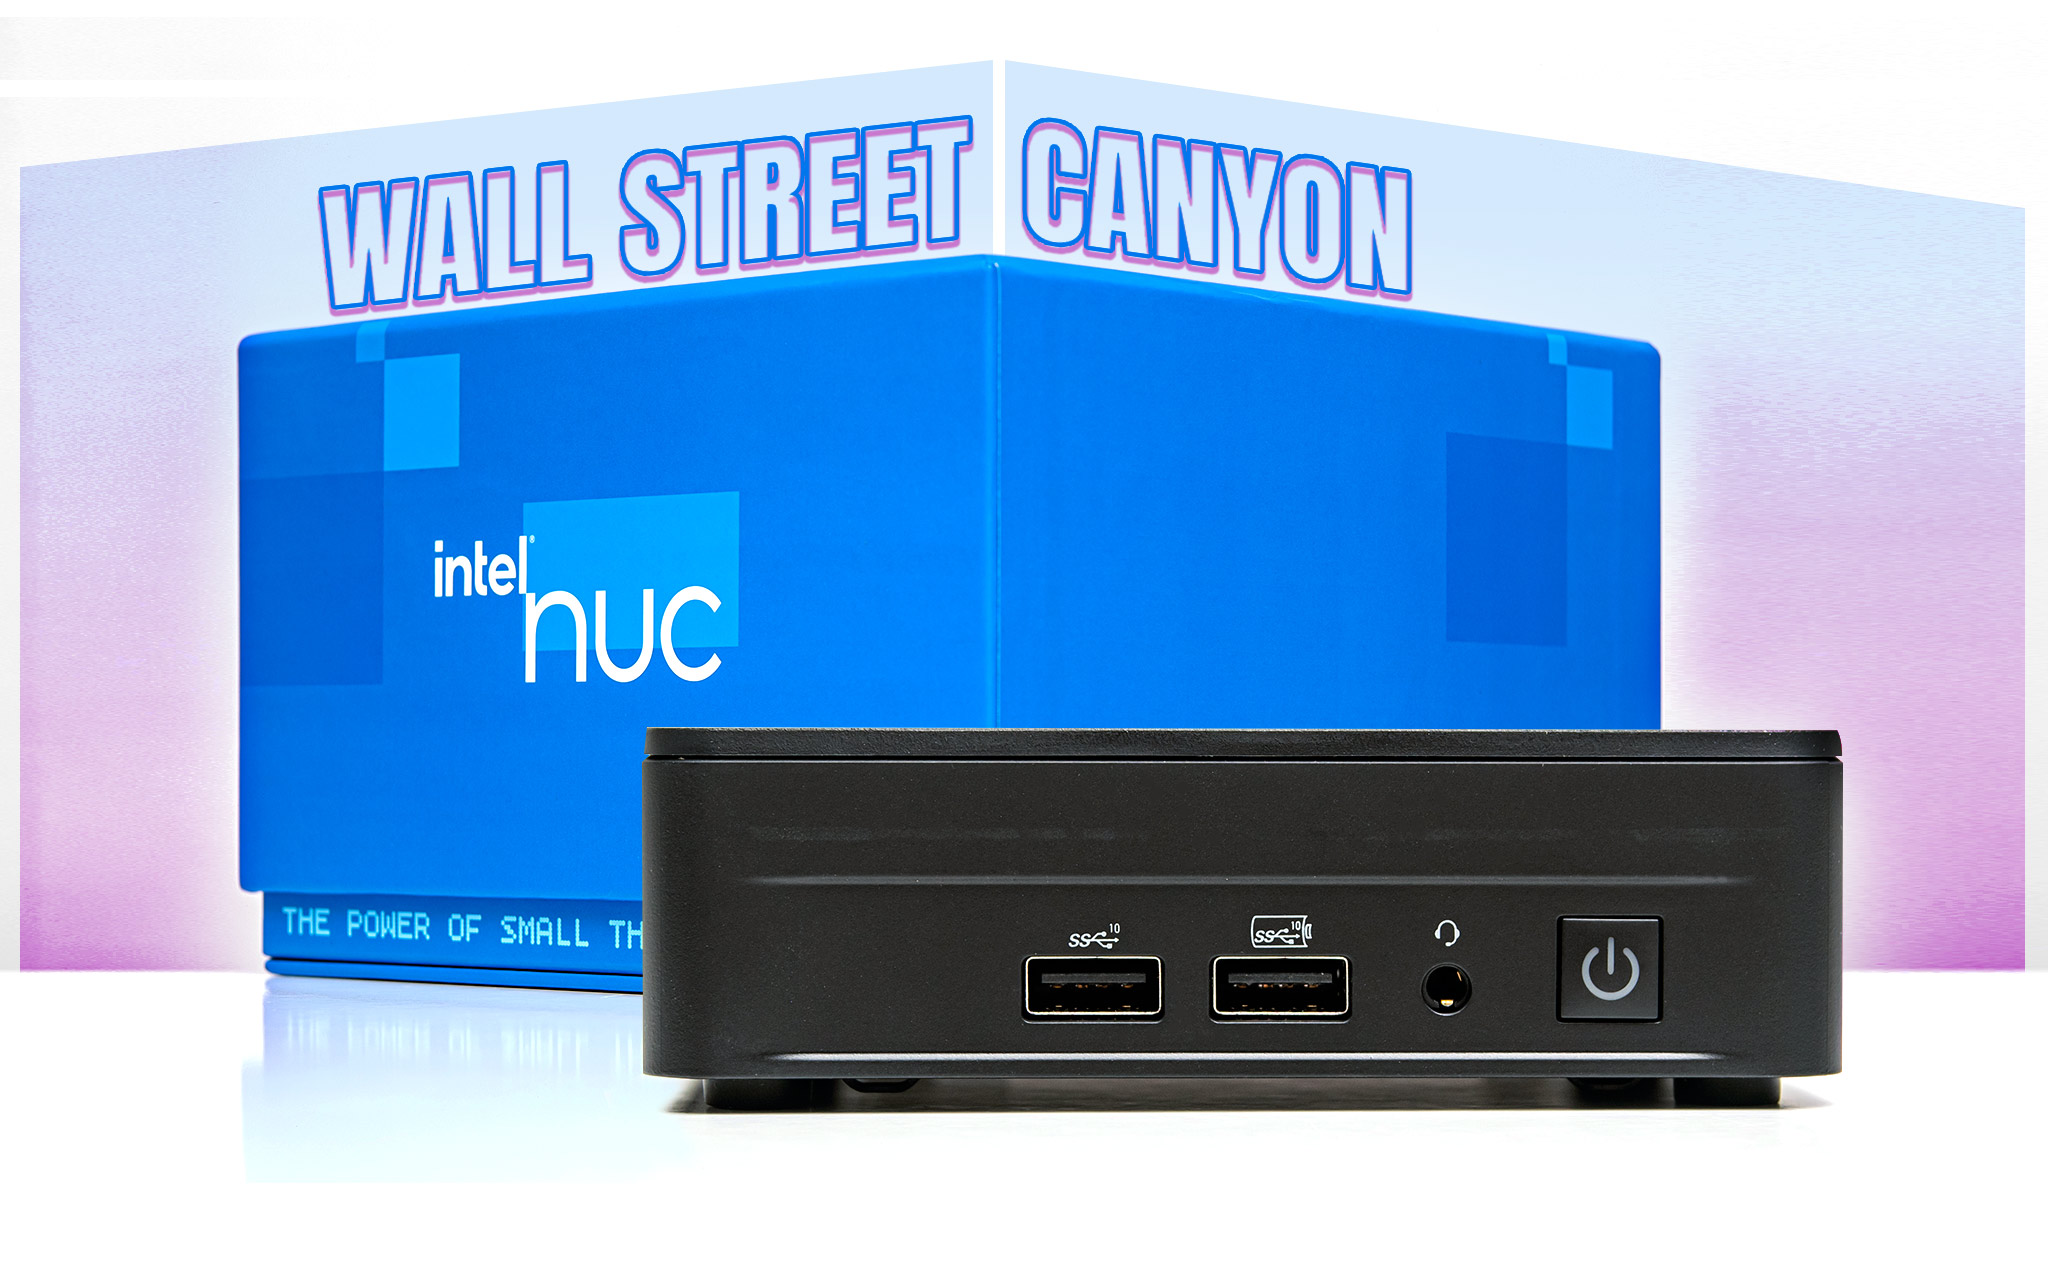 Thử nghiệm Intel NUC 12 Pro “Wall Street Canyon” - The Power Of Small